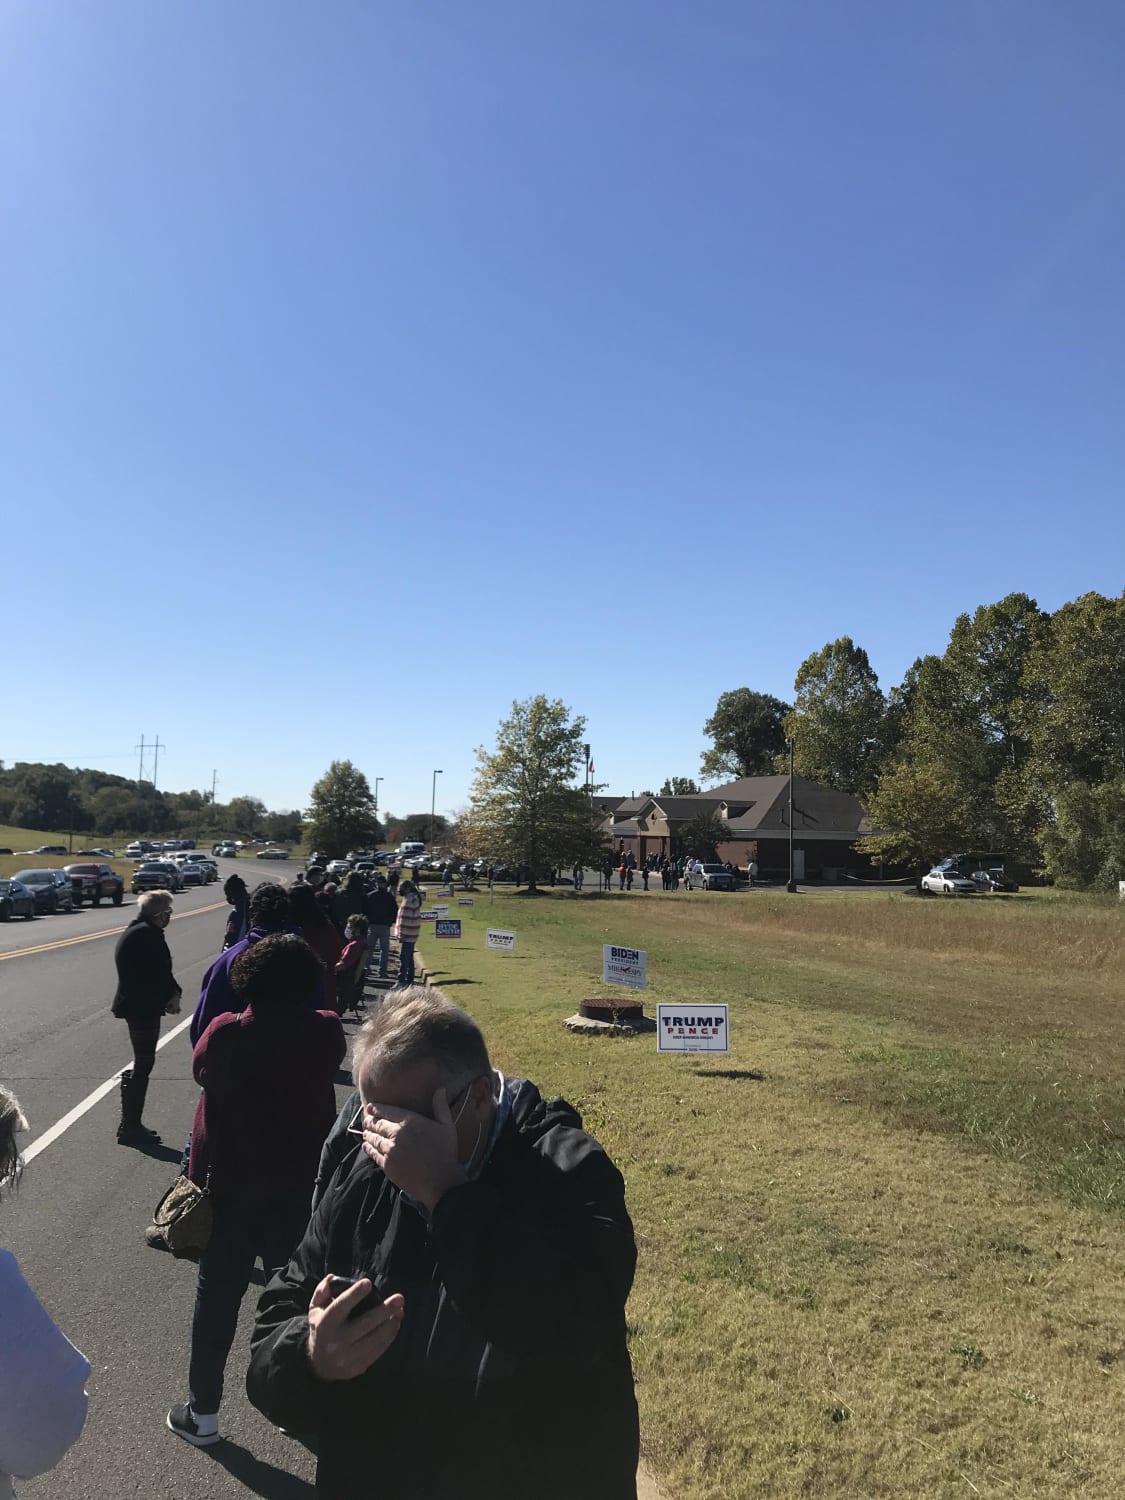 Voting in Mississippi where there is no early voting. Lines are a bit long today